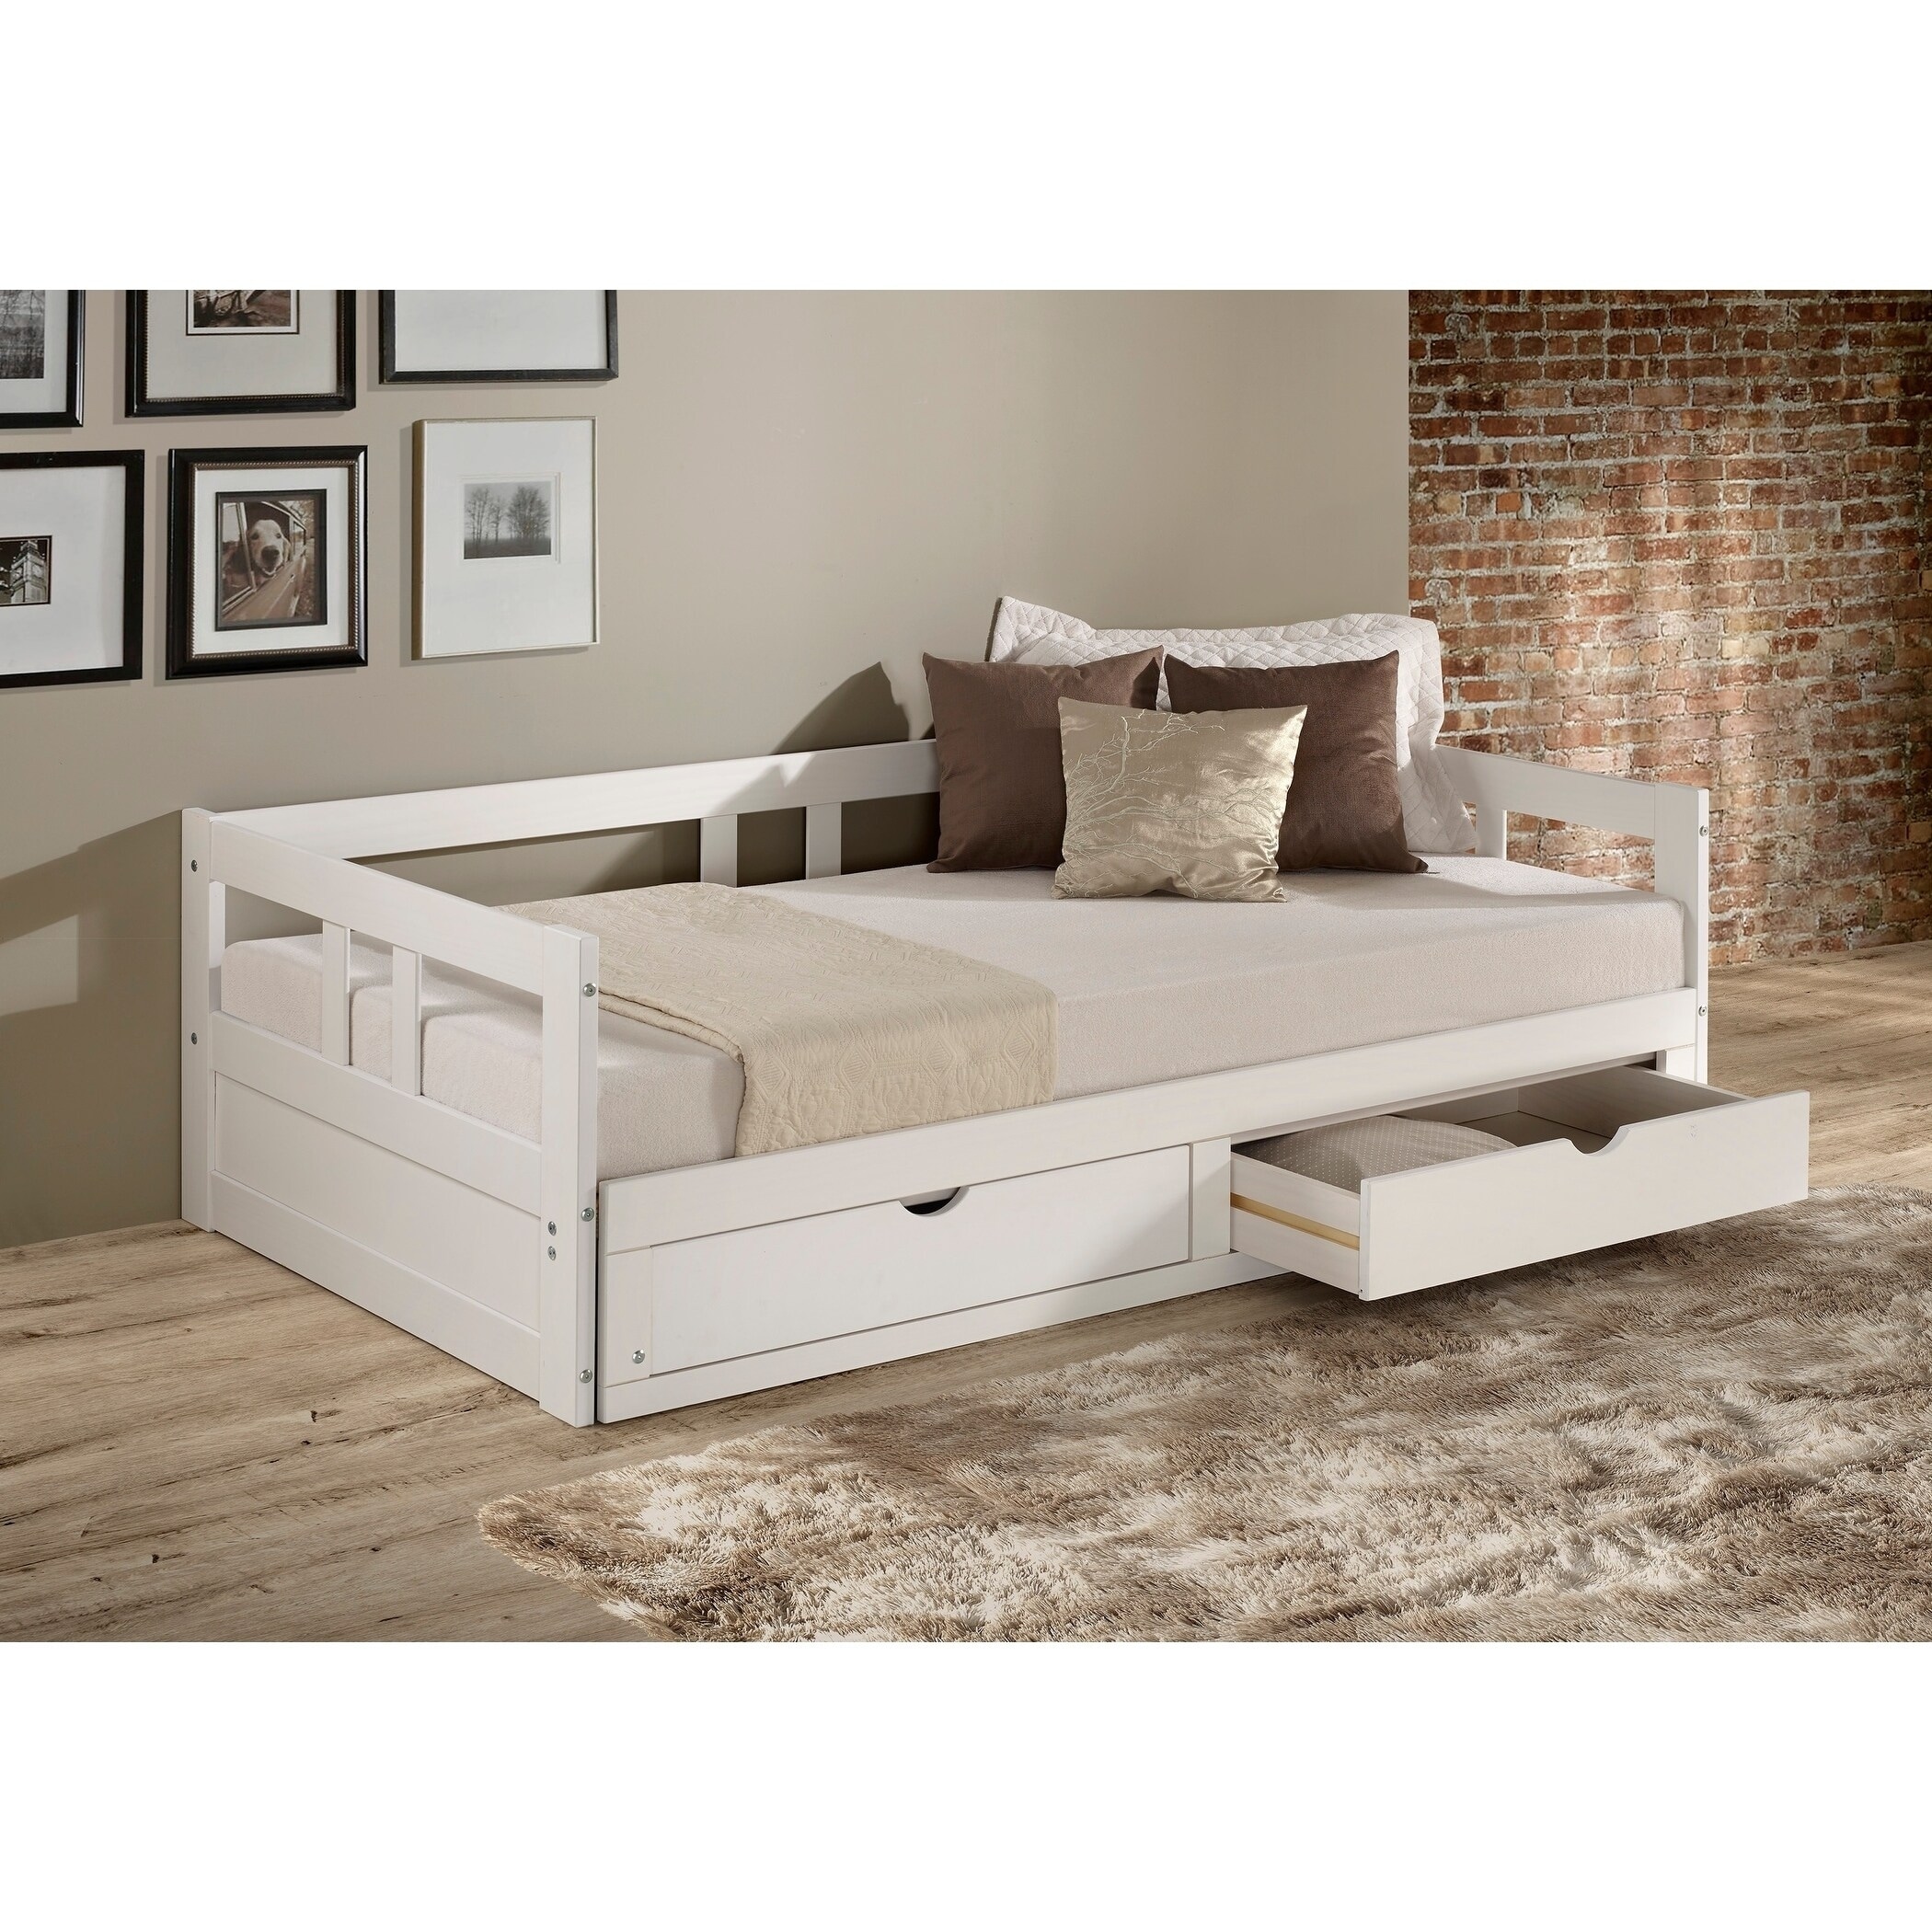 https://ak1.ostkcdn.com/images/products/is/images/direct/f1de1fa569e1c4e7f4832f2656559cc408644aea/Melody-Expandable-Twin-to-King-Trundle-Daybed-with-Storage-Drawers.jpg